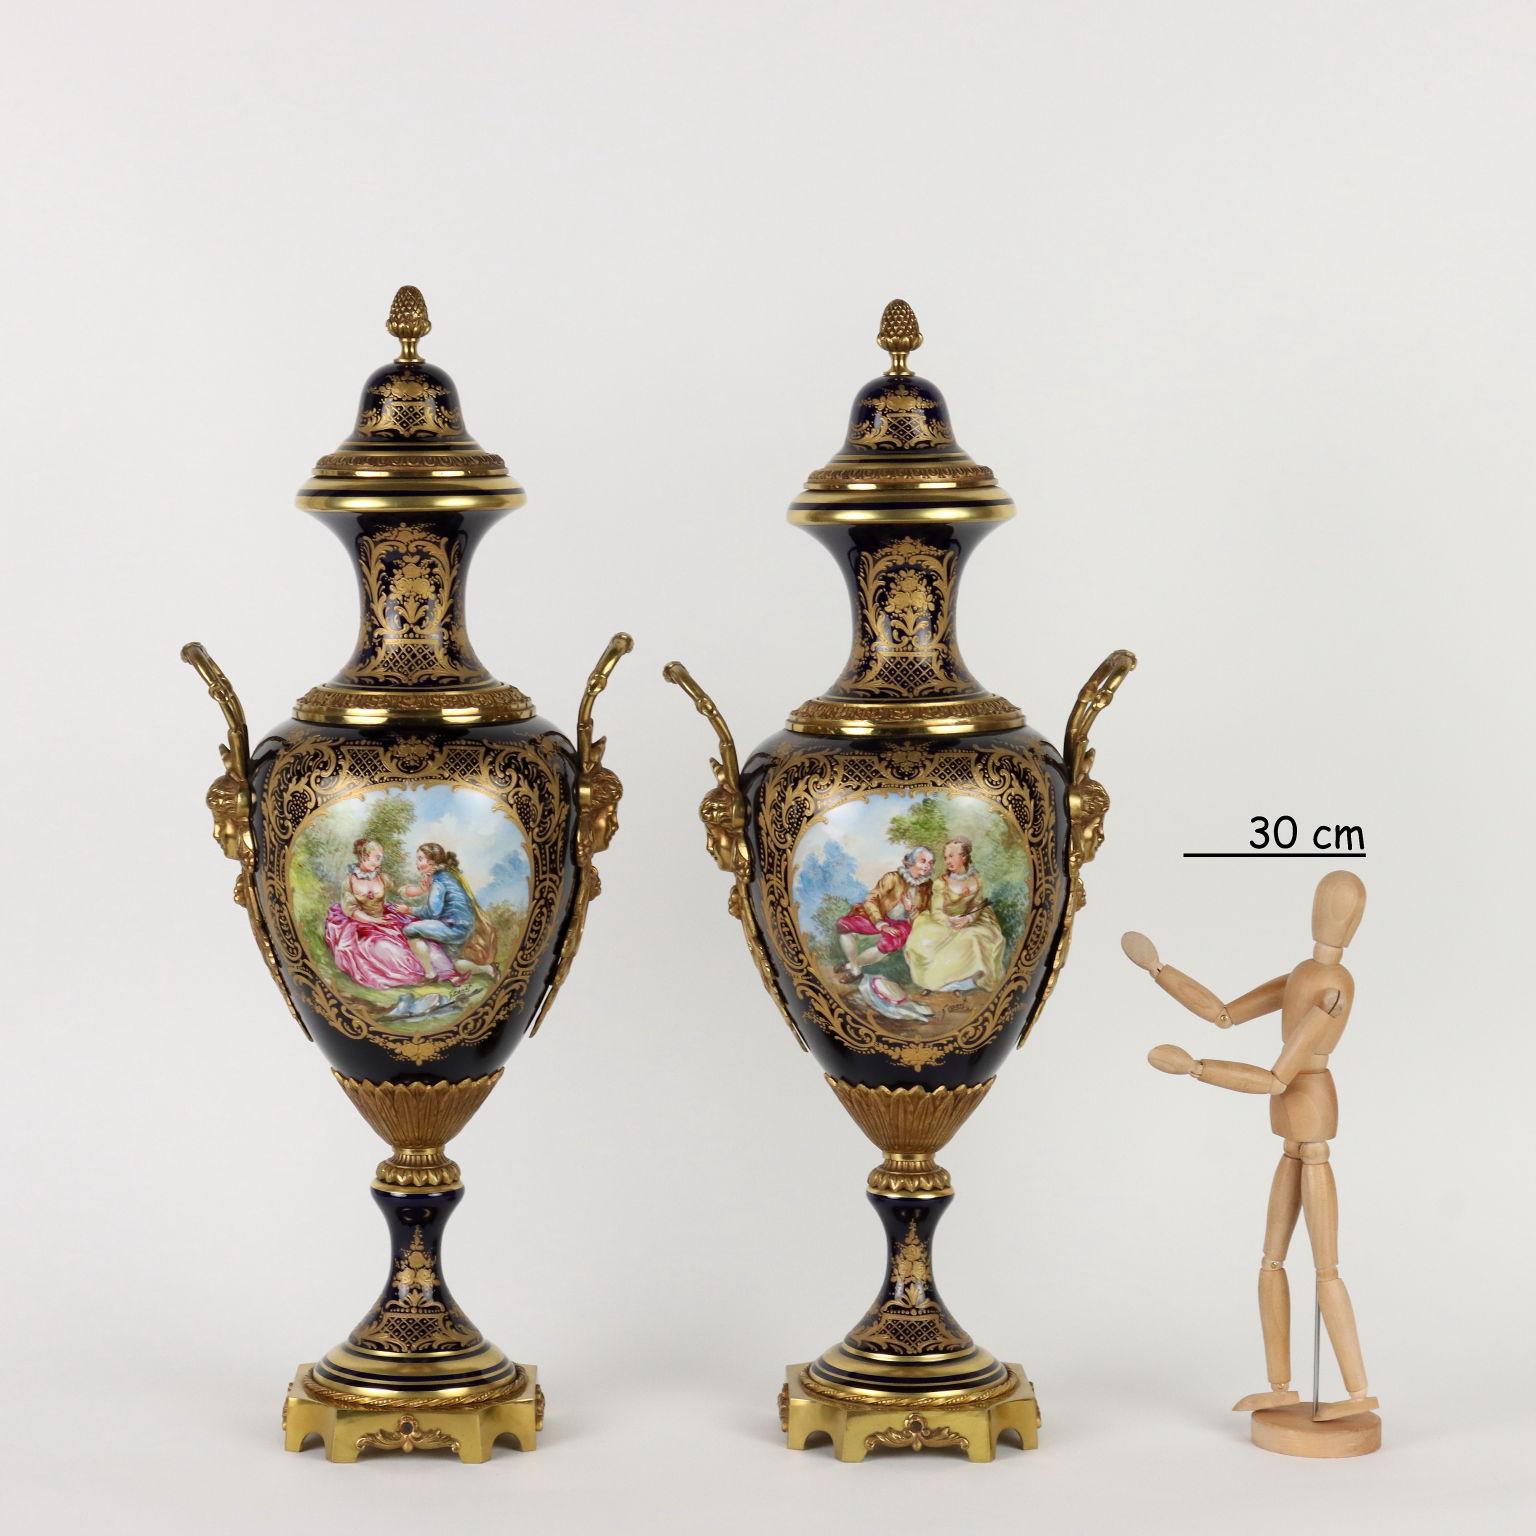 Pair of Sèvres porcelain vases with amorous scenes painted in polychrome inside reserves and signed by Granet. On a cobalt blue background the rich gold decorations with leafy scrolls and plant motifs stand out. The vases are mounted on gilt bronze